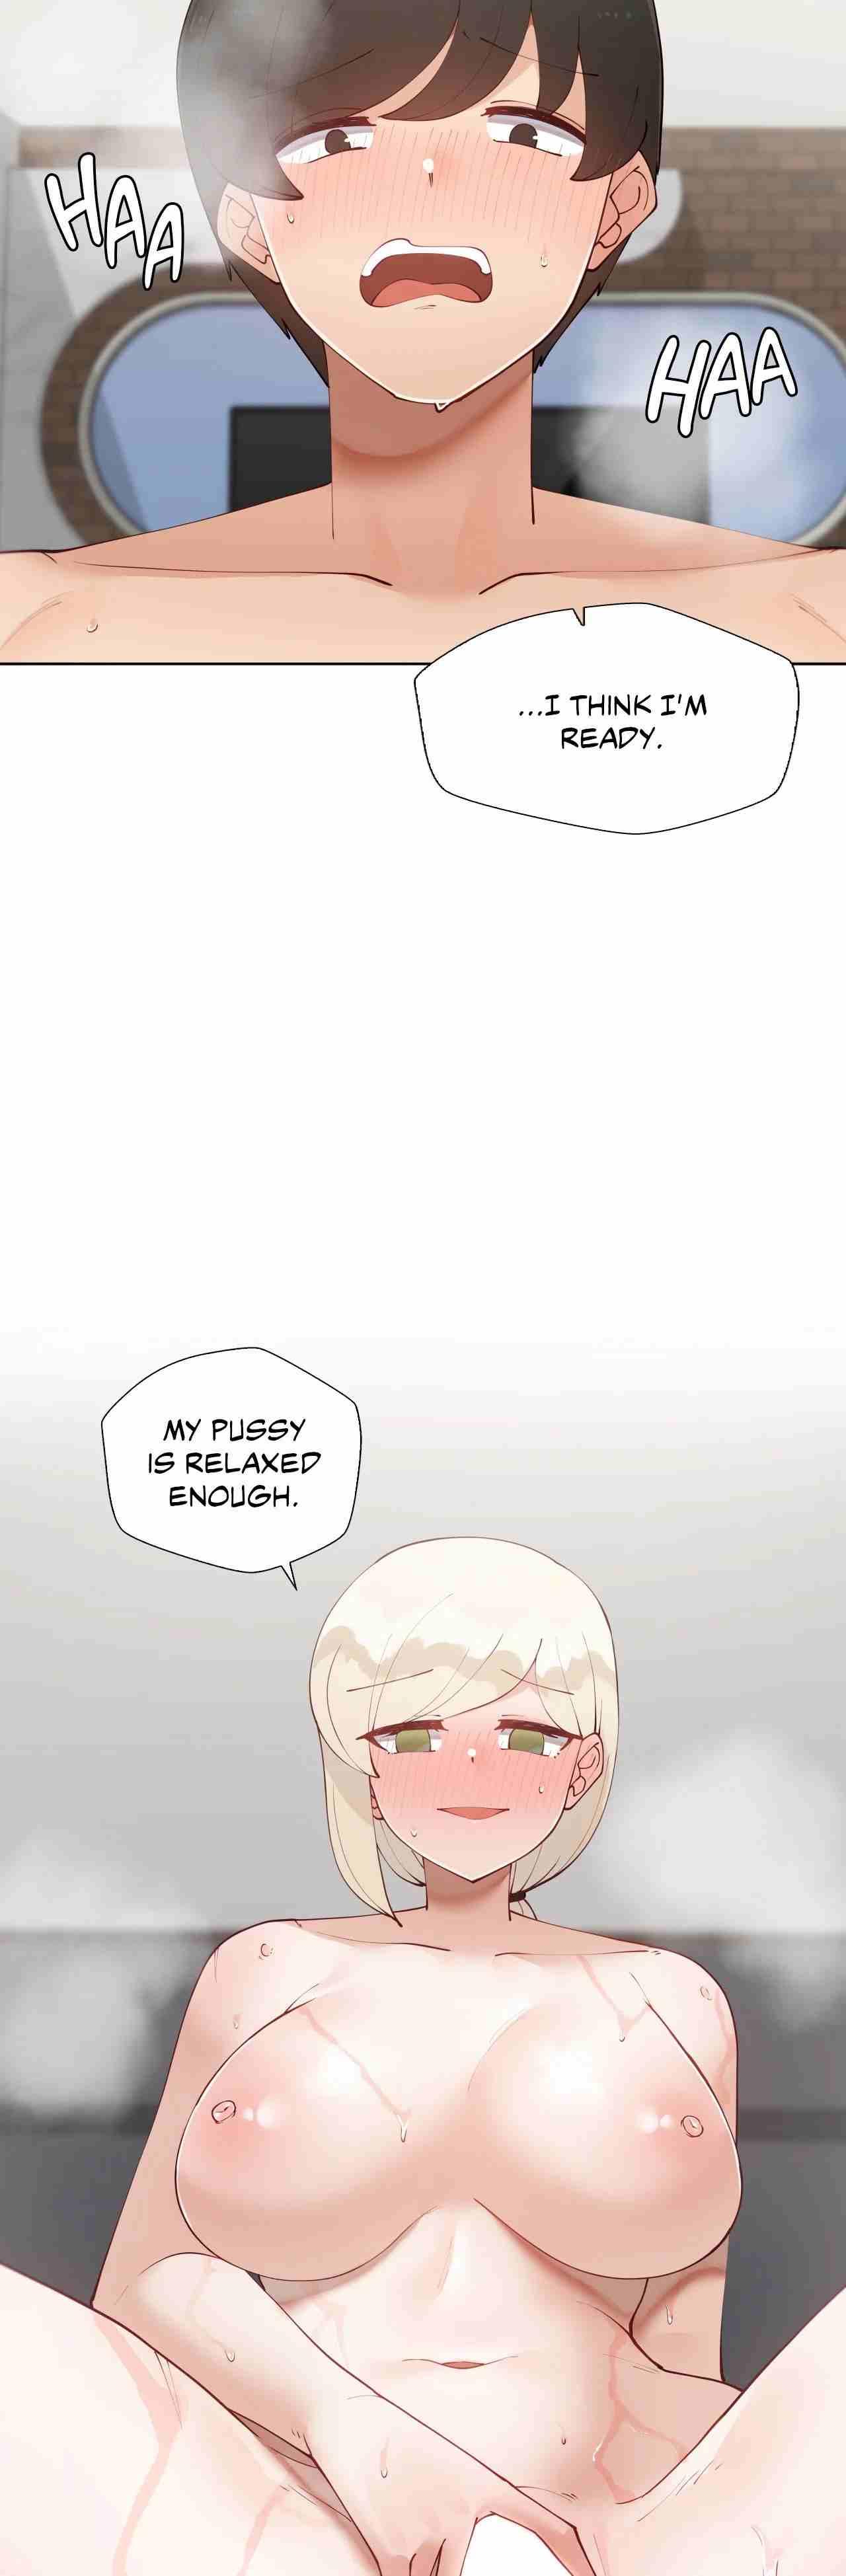 [Over.J, Choi Tae-young] Learning the Hard Way 2nd Season (After Story) Ch.4/? [English] [Manhwa PDF] Ongoing 29